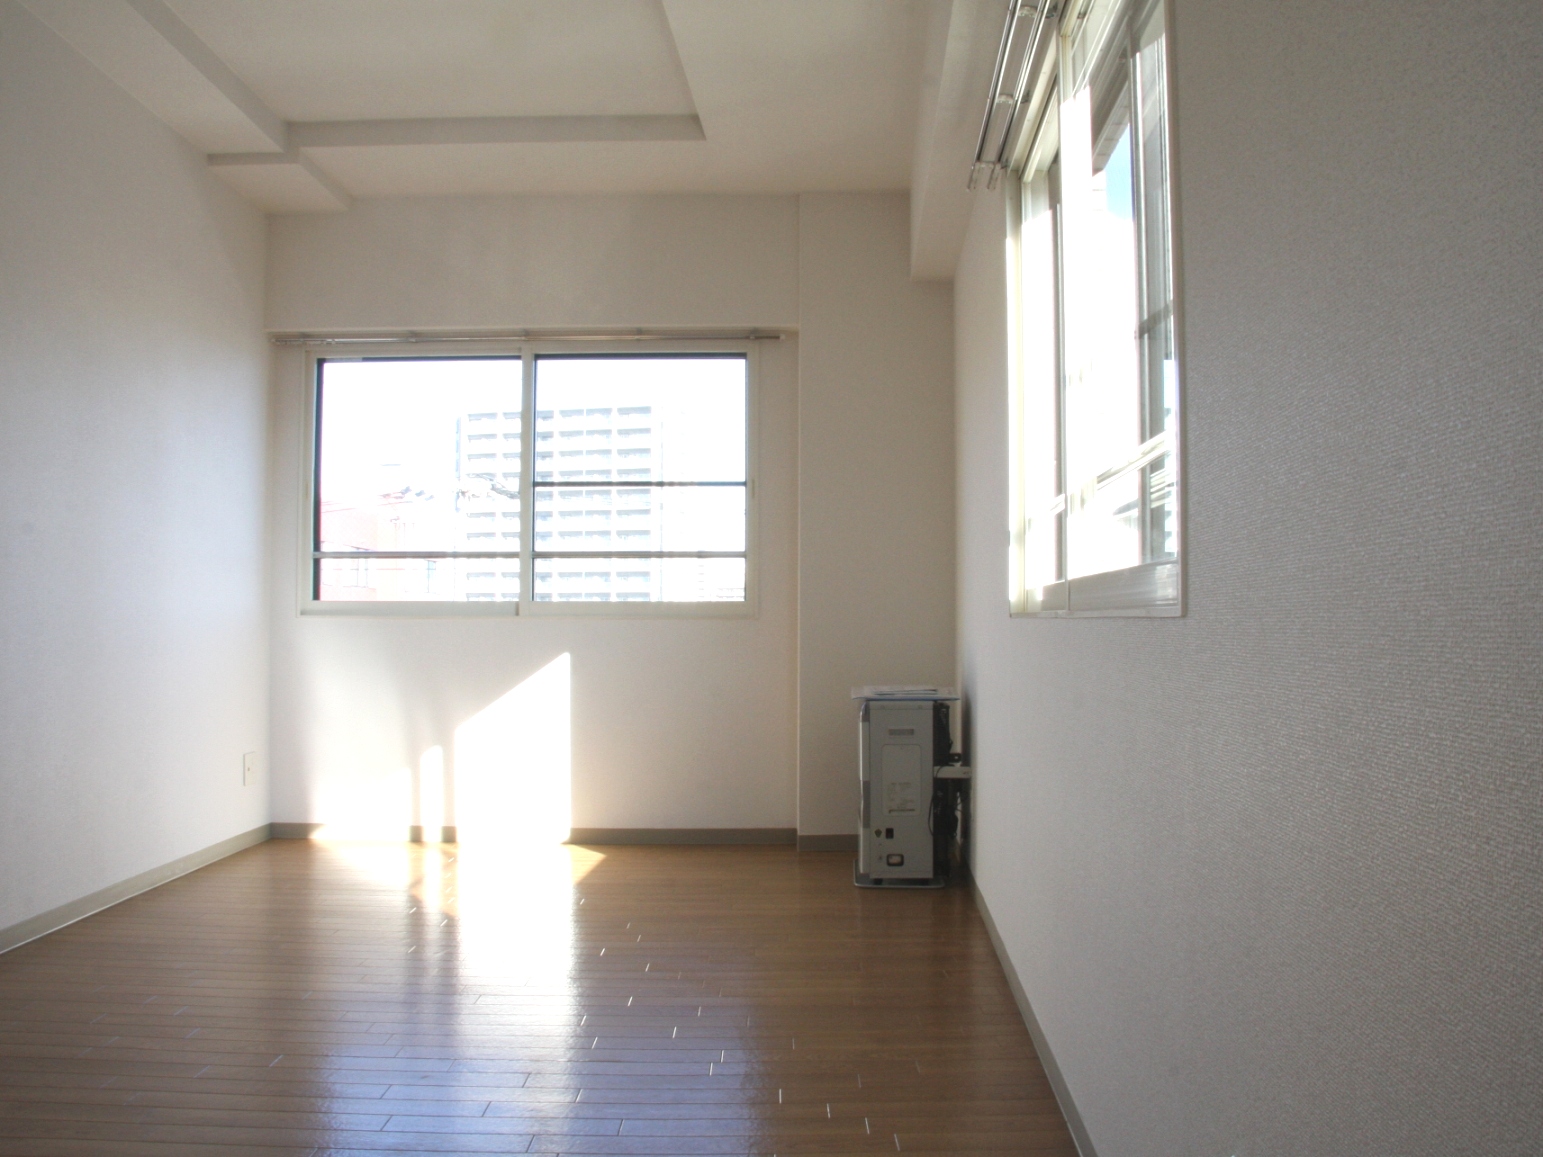 Living and room. Day two-plane daylight ・ Ventilation ◎